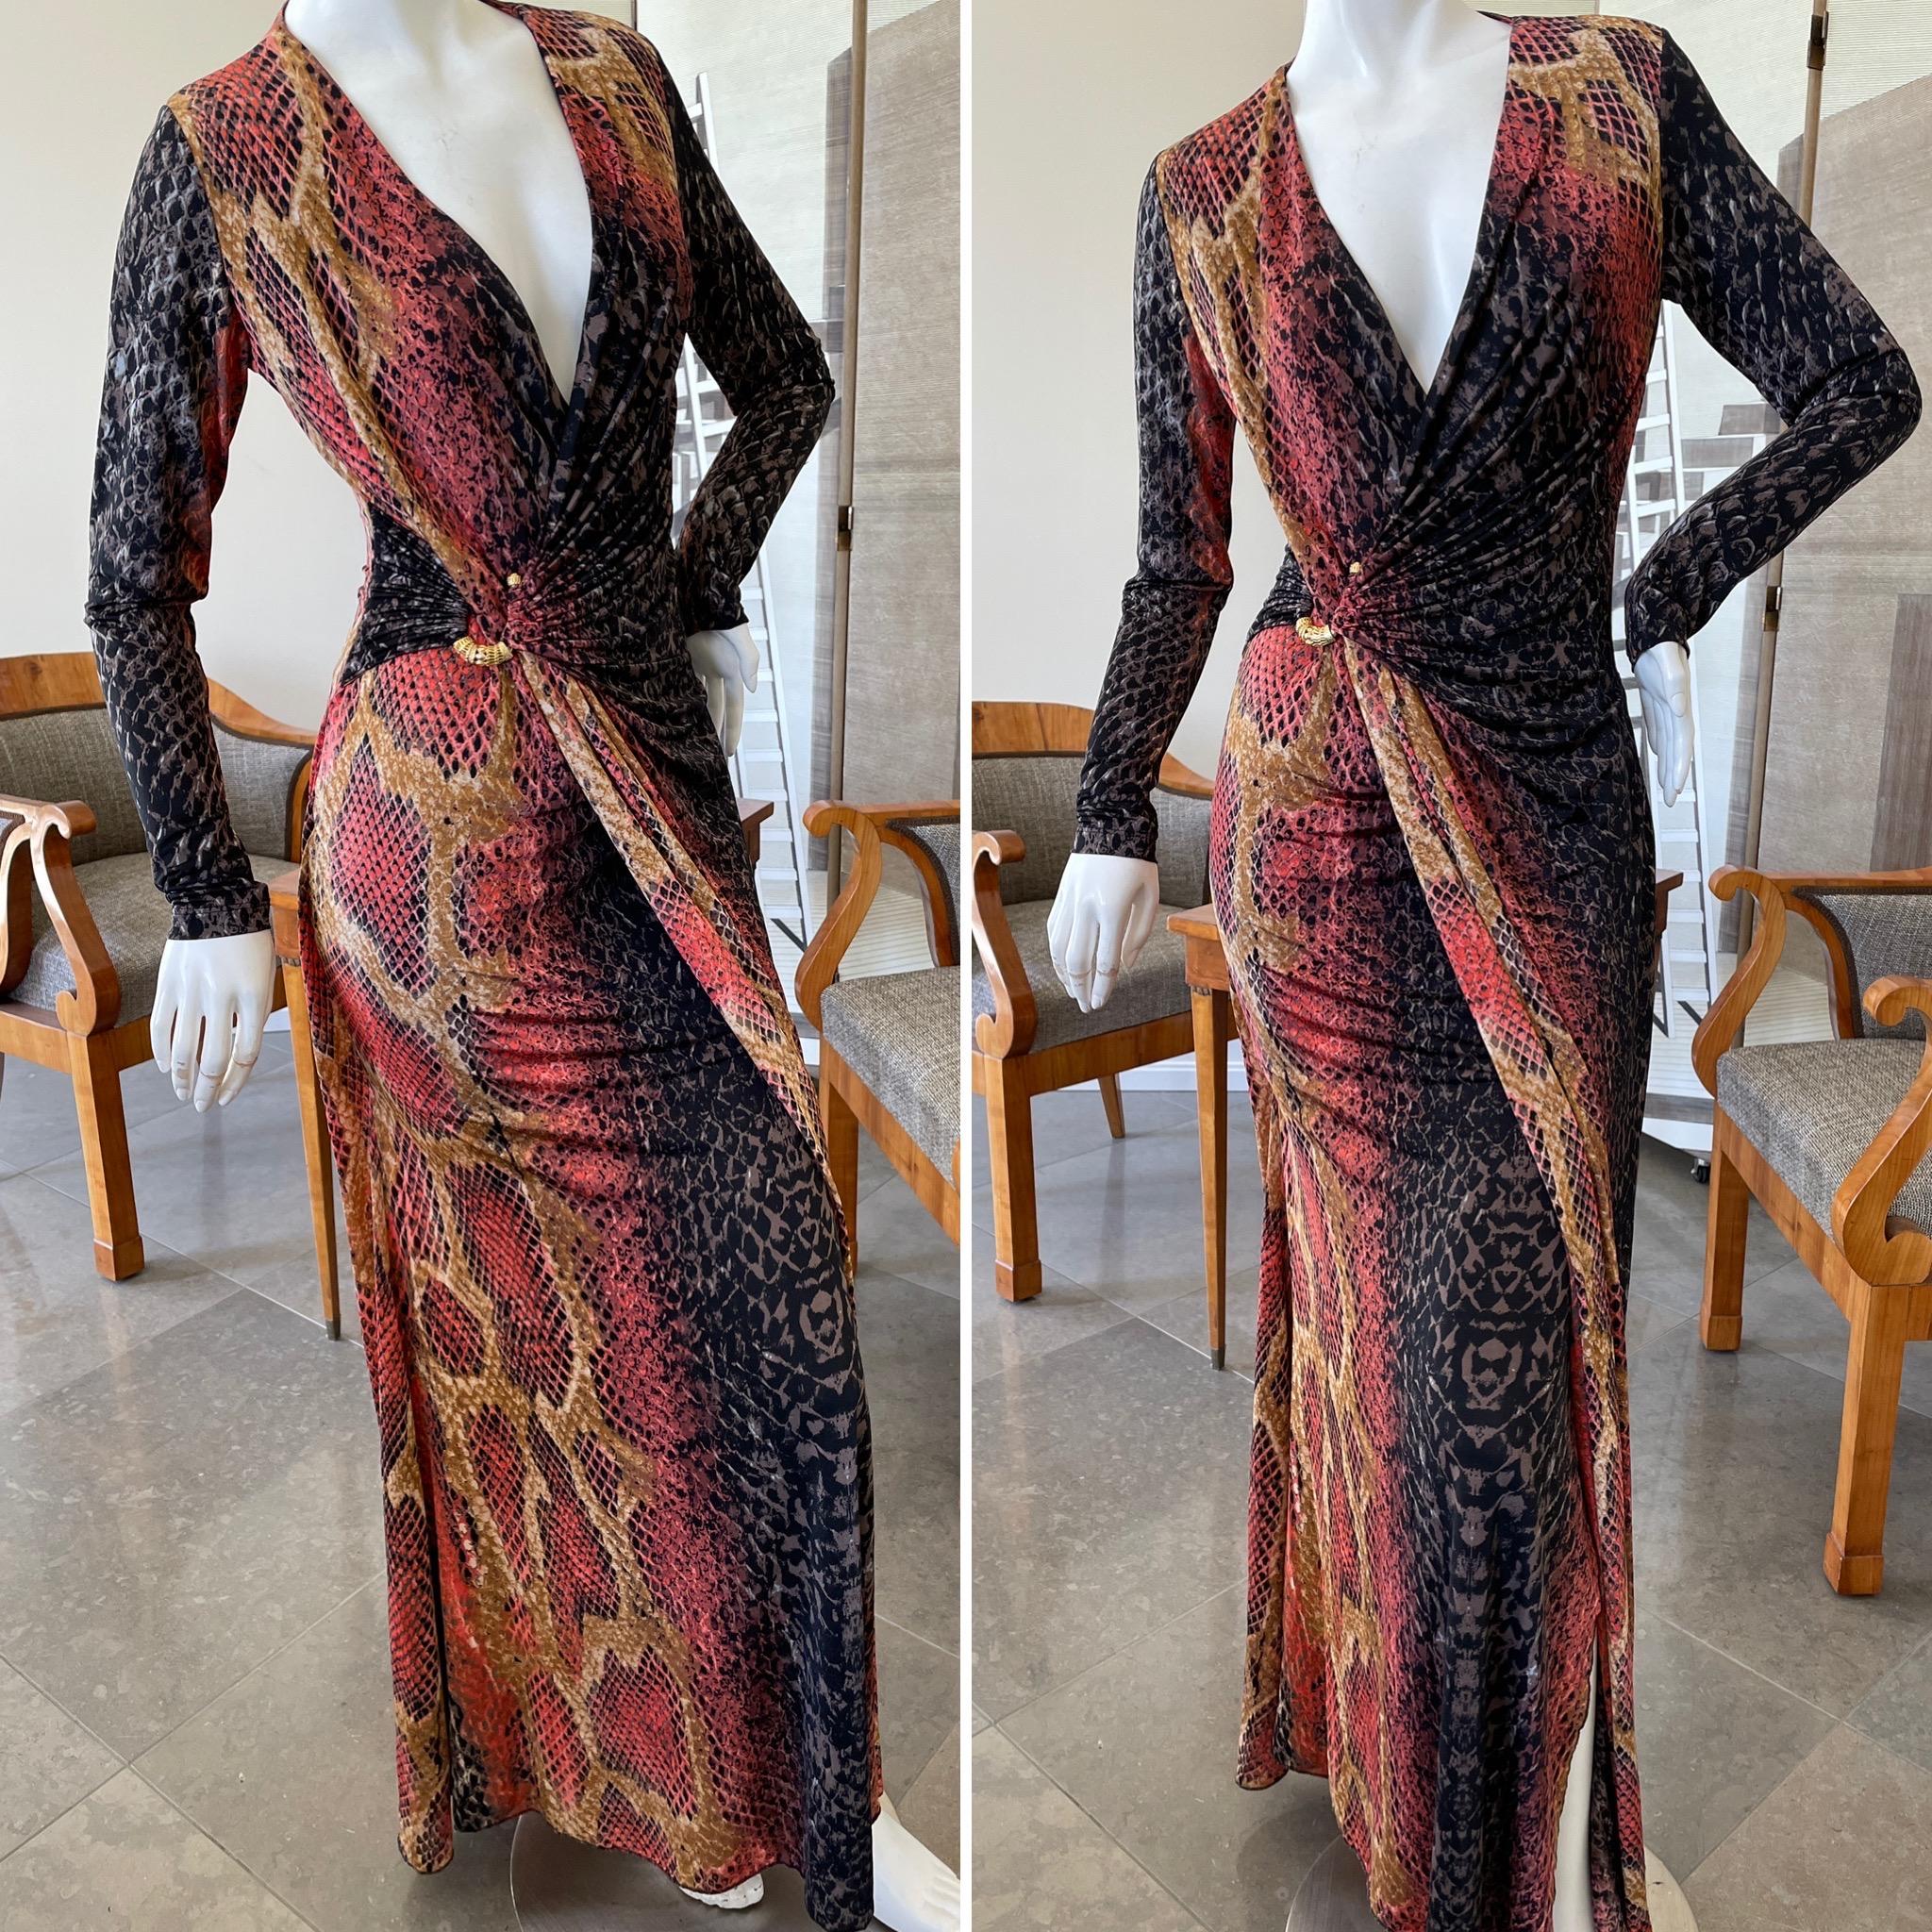 Roberto Cavalli Vintage Plunging Reptile Print Evening Dress with Hip Ornament
Size Small, there is a lot of stretch
 Bust 36